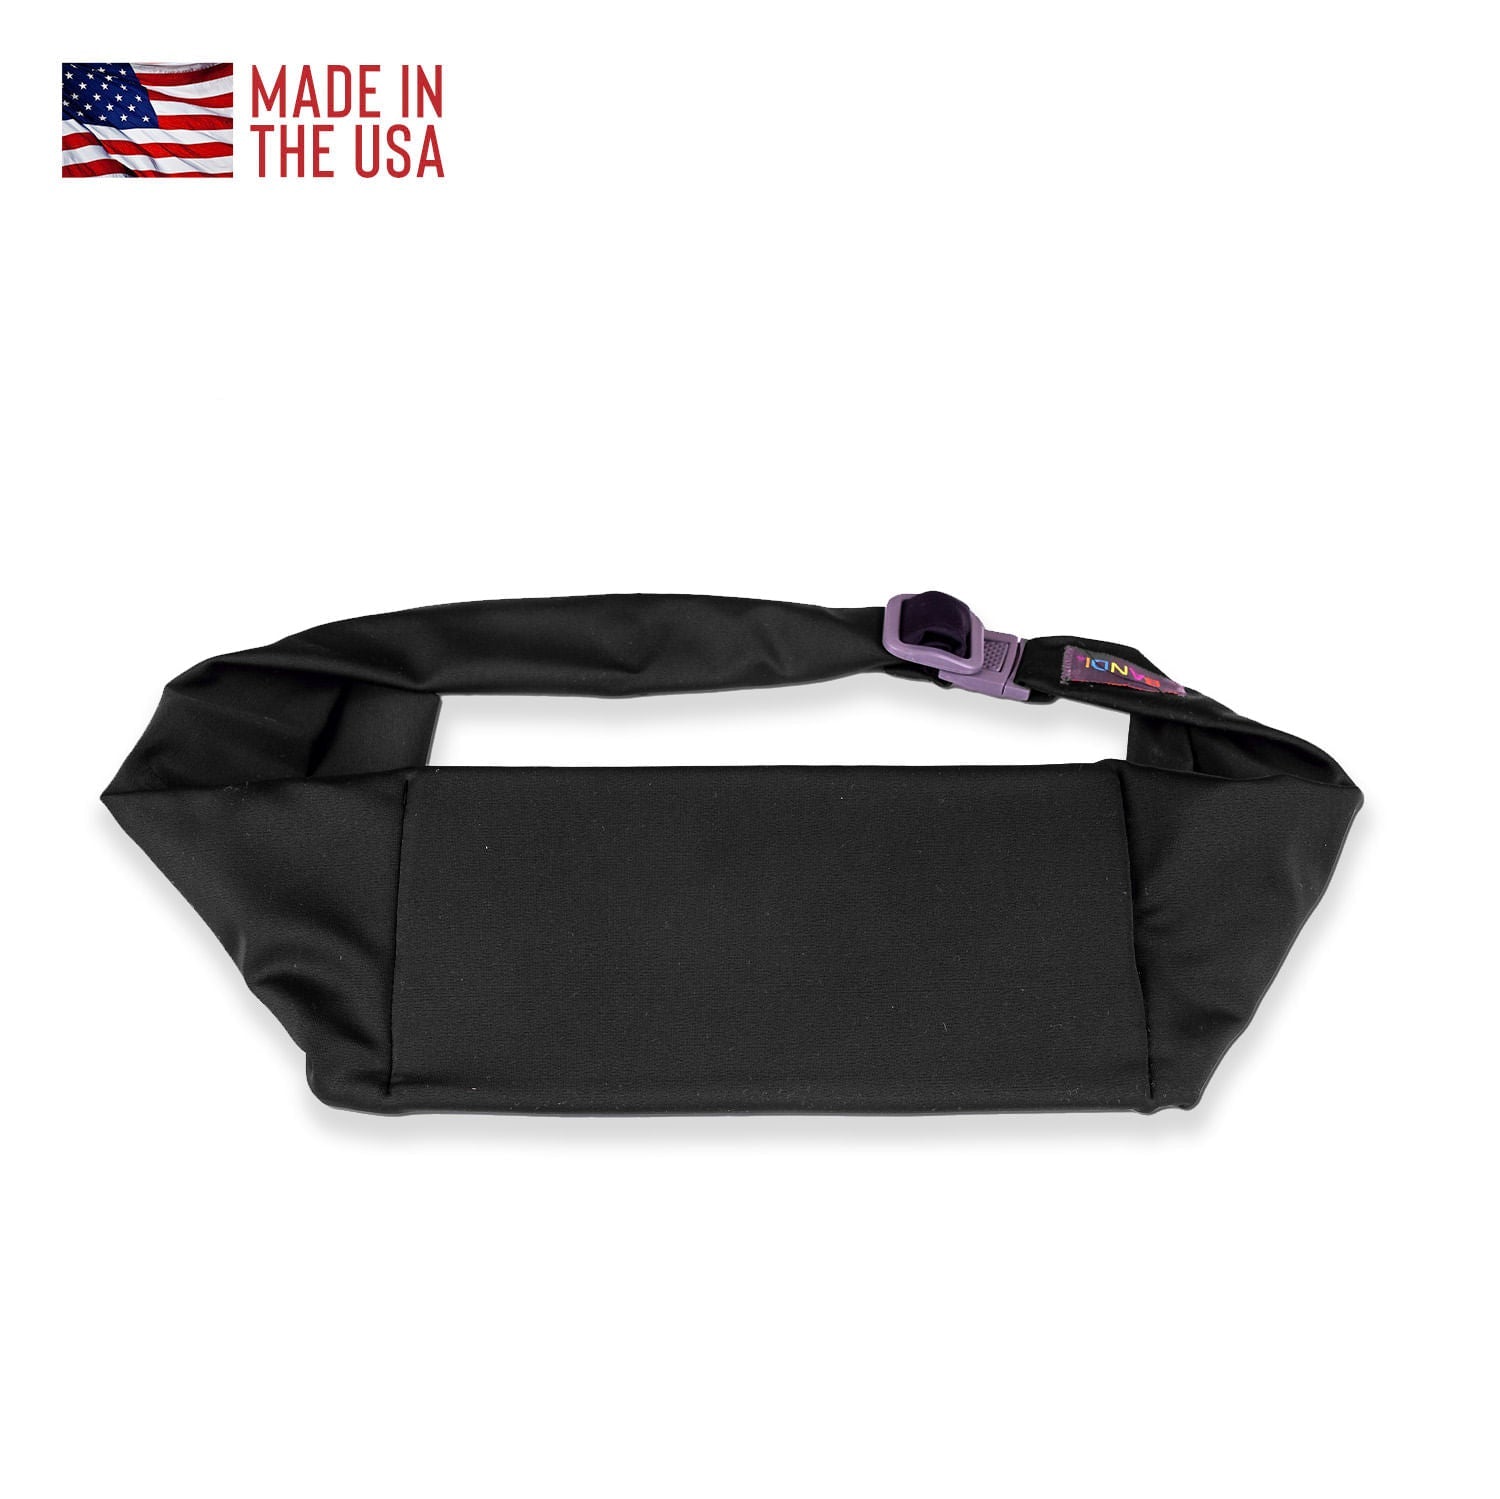 Large pocket belt in black, great for running and securing valuables under your clothes. 